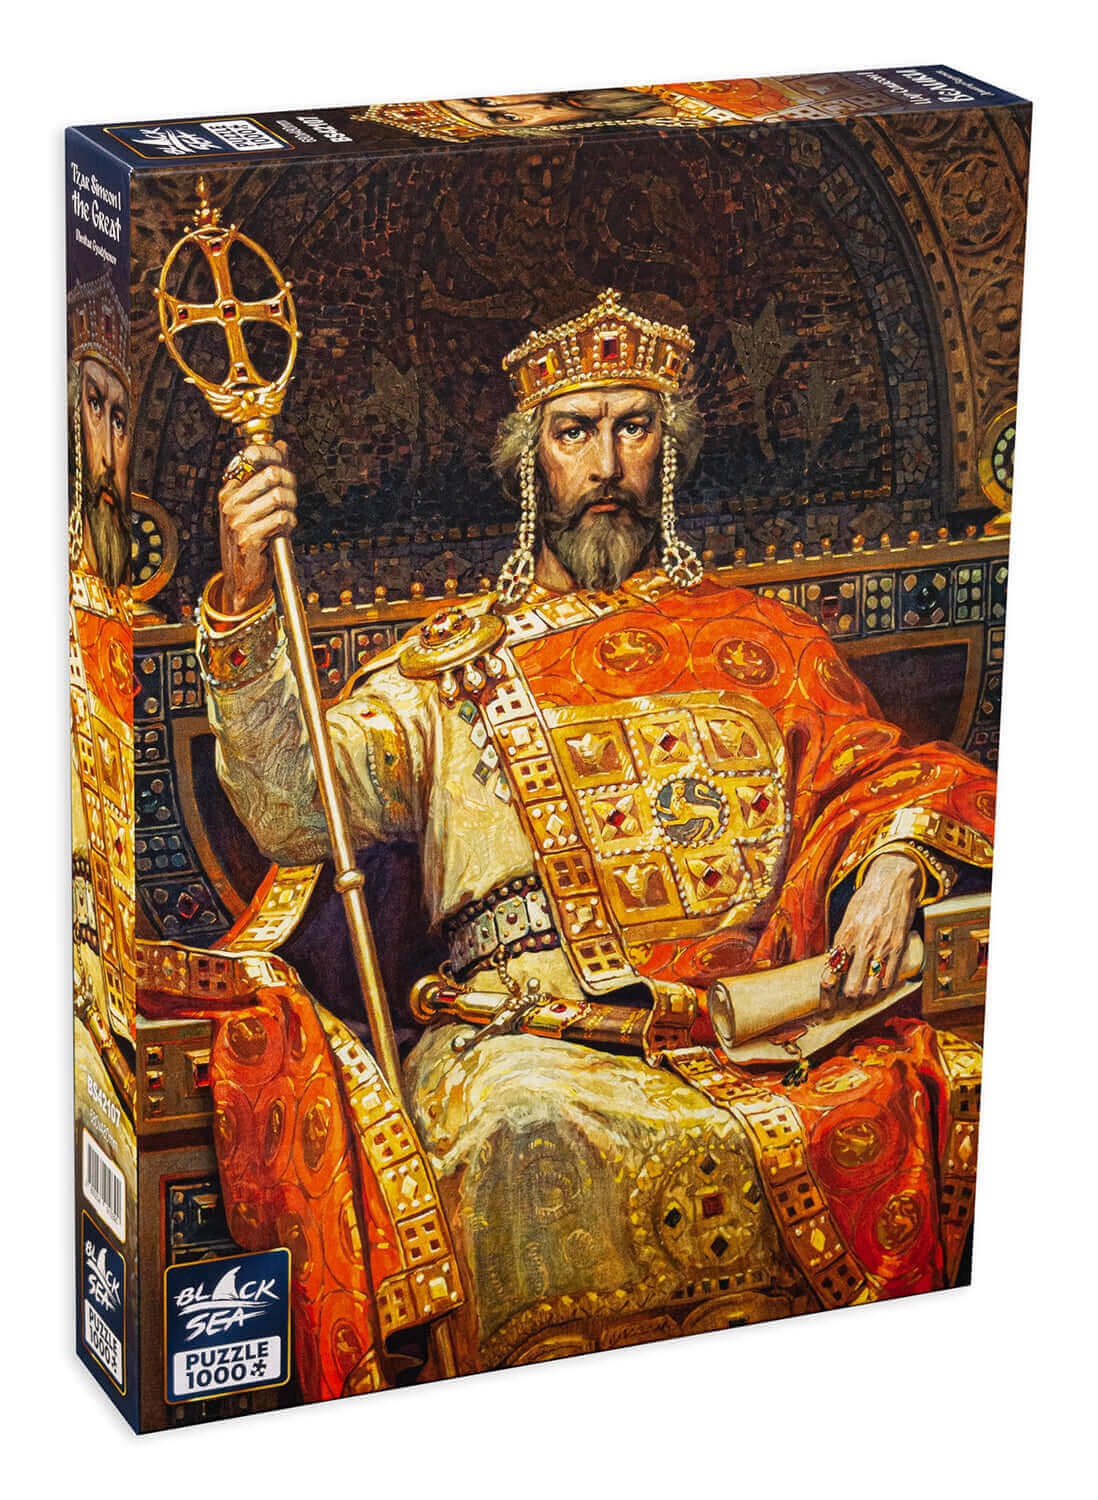 Puzzle Black Sea 1000 pieces - Tzar Simeon I the Great, Tzar Simeon I the Great is a Bulgarian ruler; he reigned from 893 to 927. Simeon the Great is the symbol of power, strength and cultural prosperity. His skillful home and foreign policies, along with